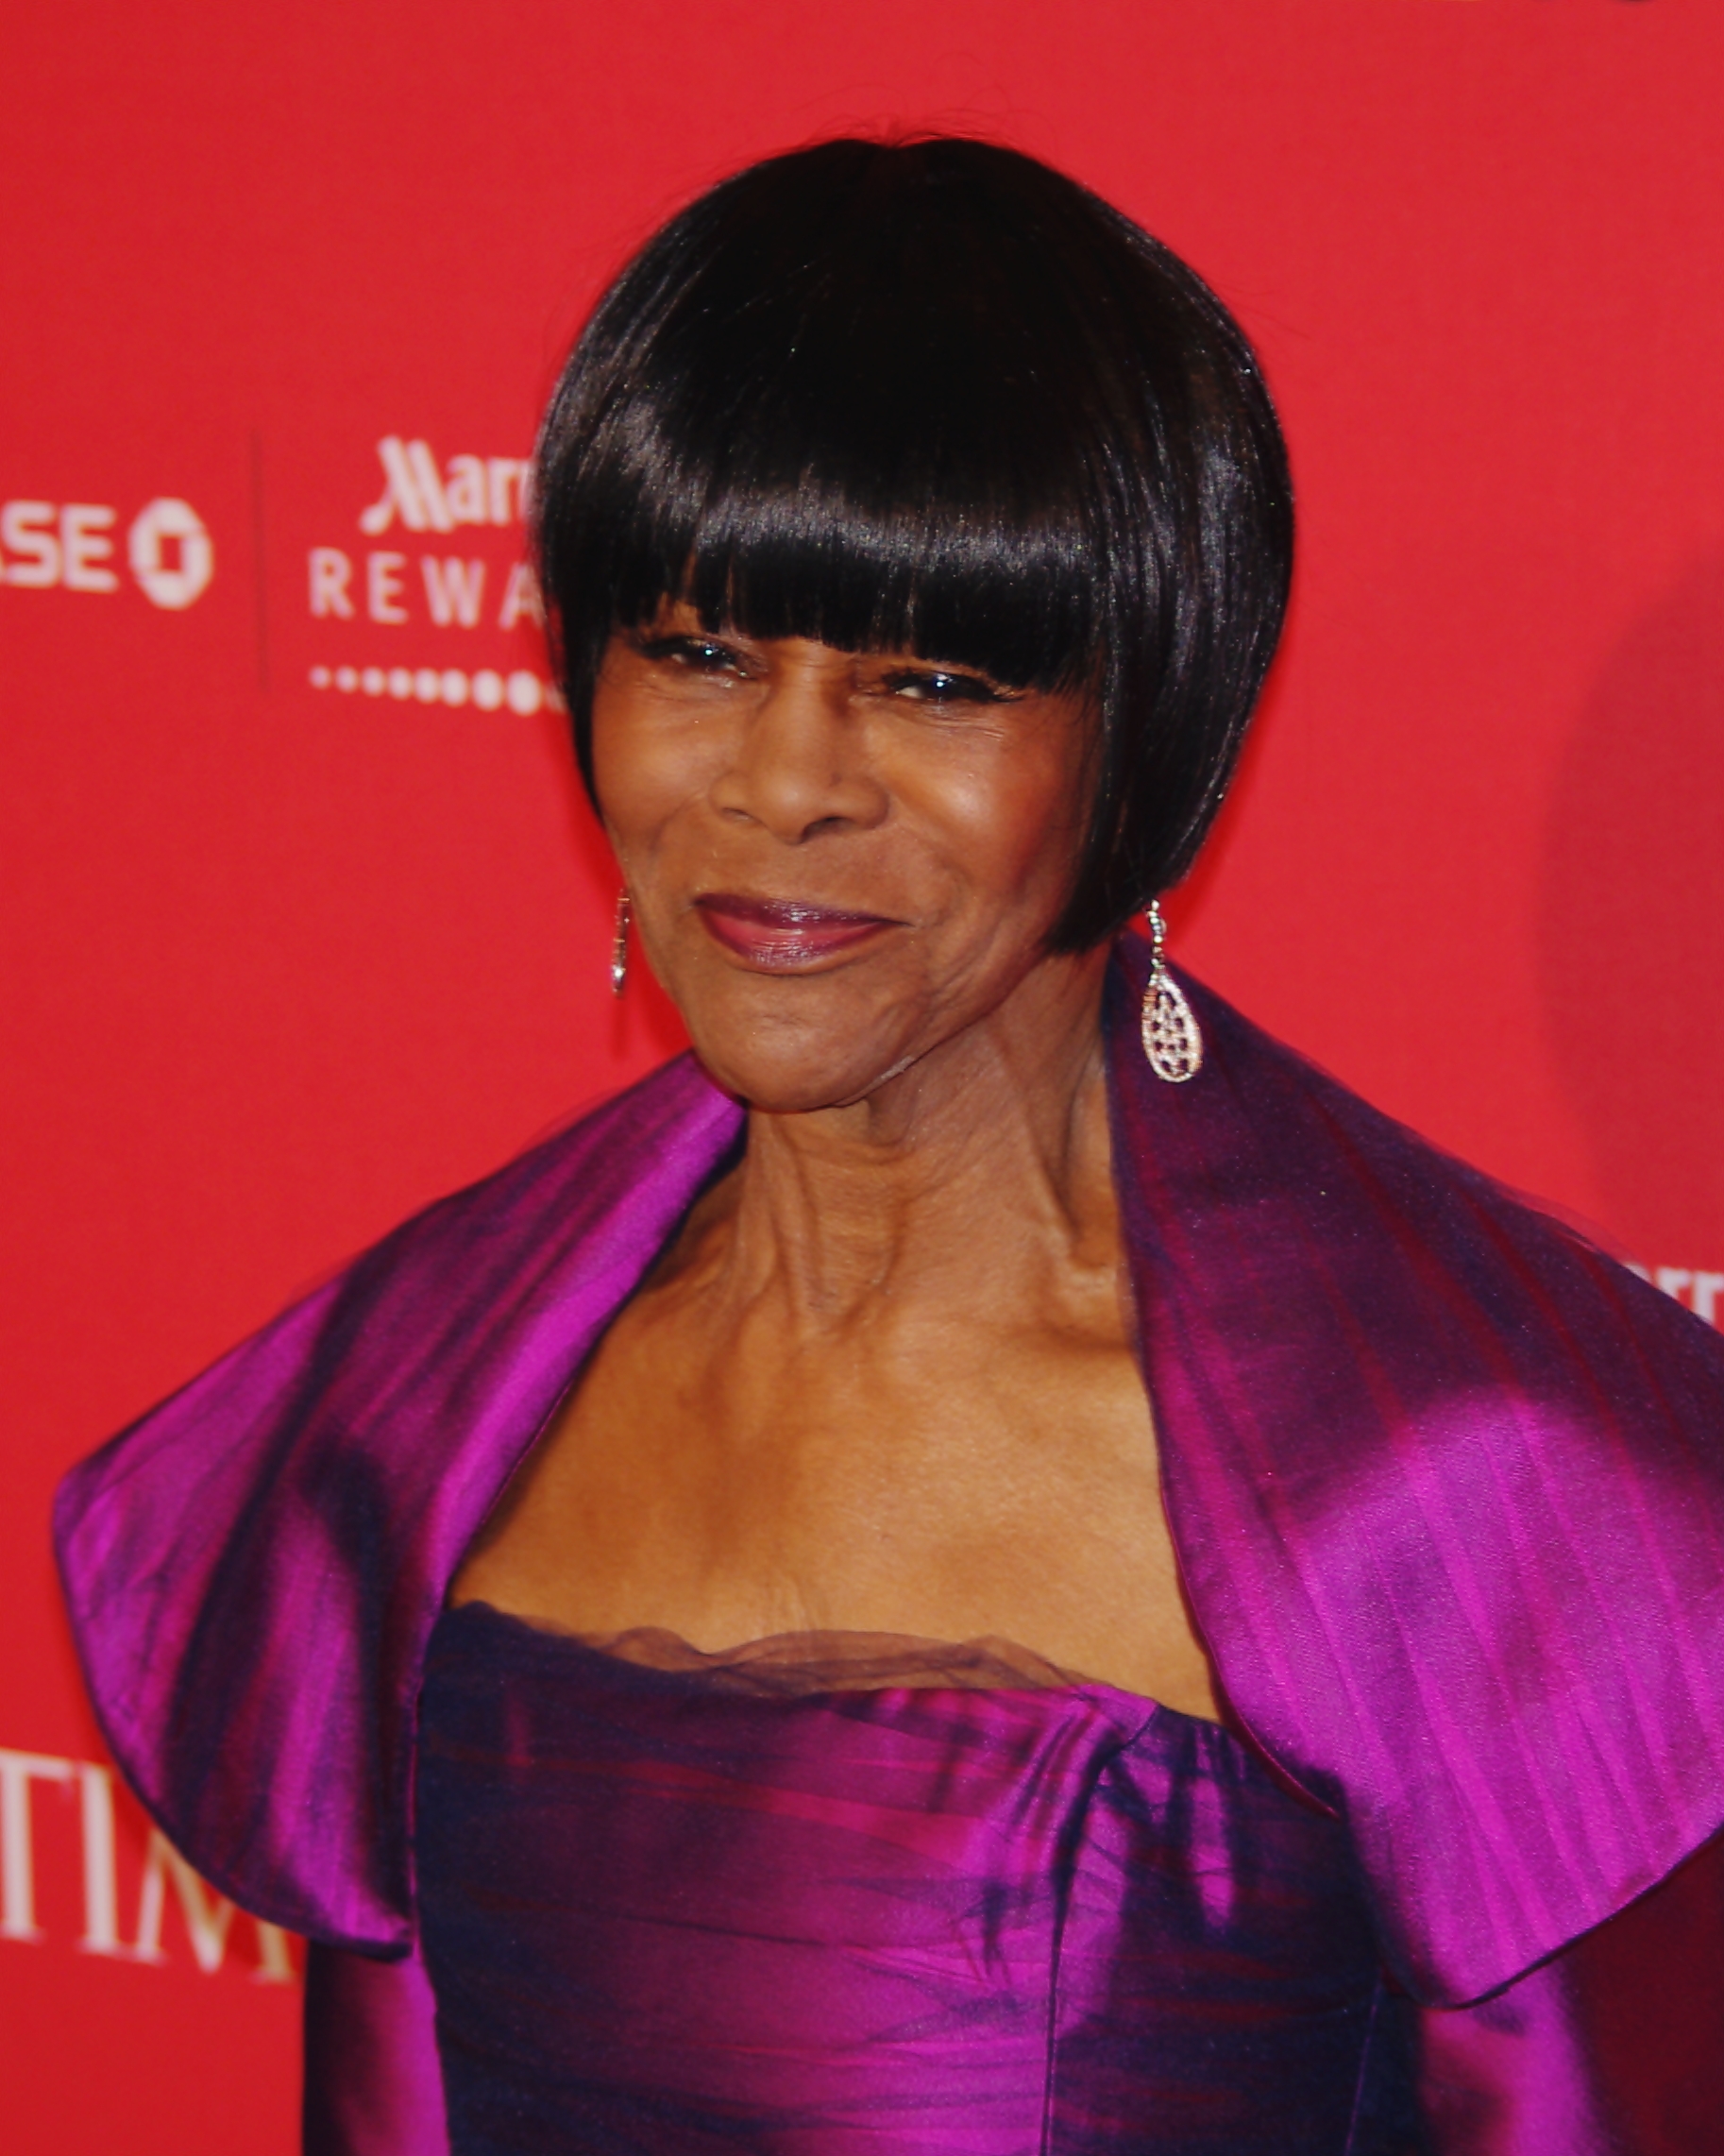 cicely-tyson-hd-wallpaper